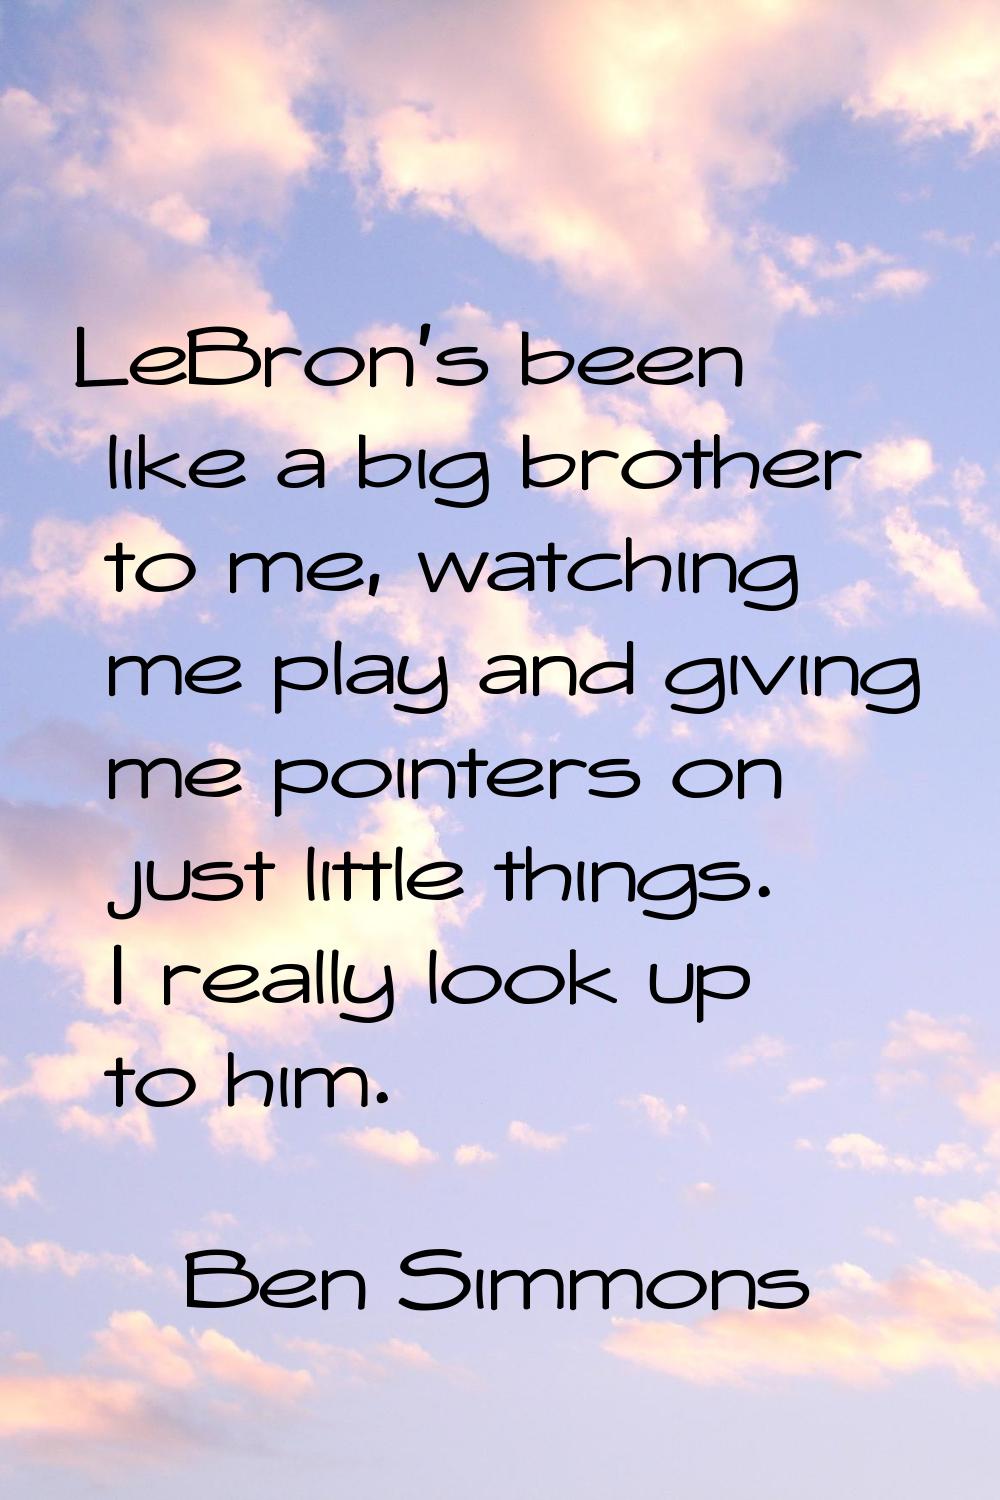 LeBron's been like a big brother to me, watching me play and giving me pointers on just little thin